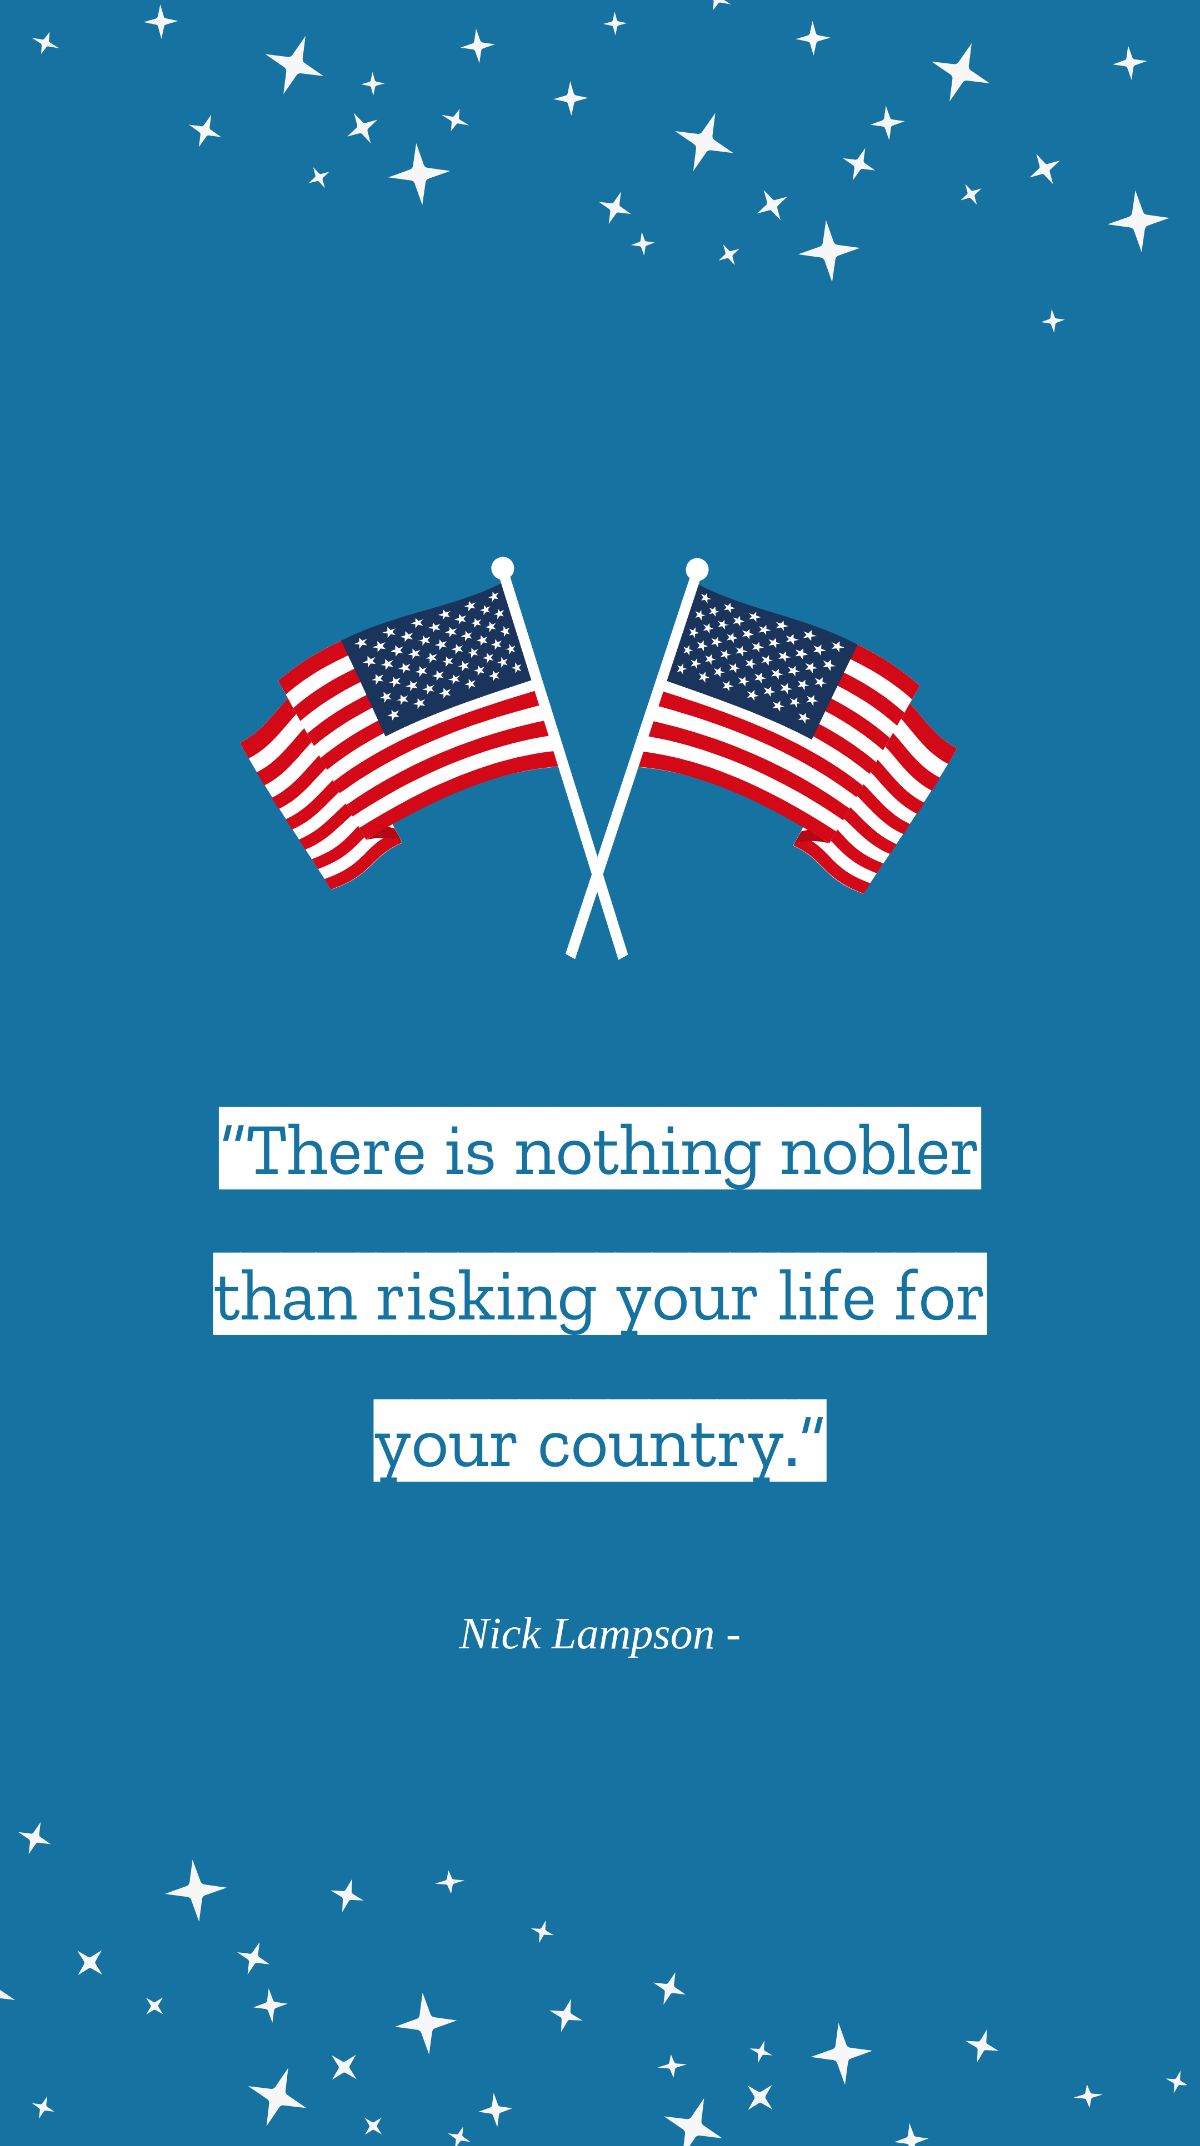 Nick Lampson - “There is nothing nobler than risking your life for your country.” Template